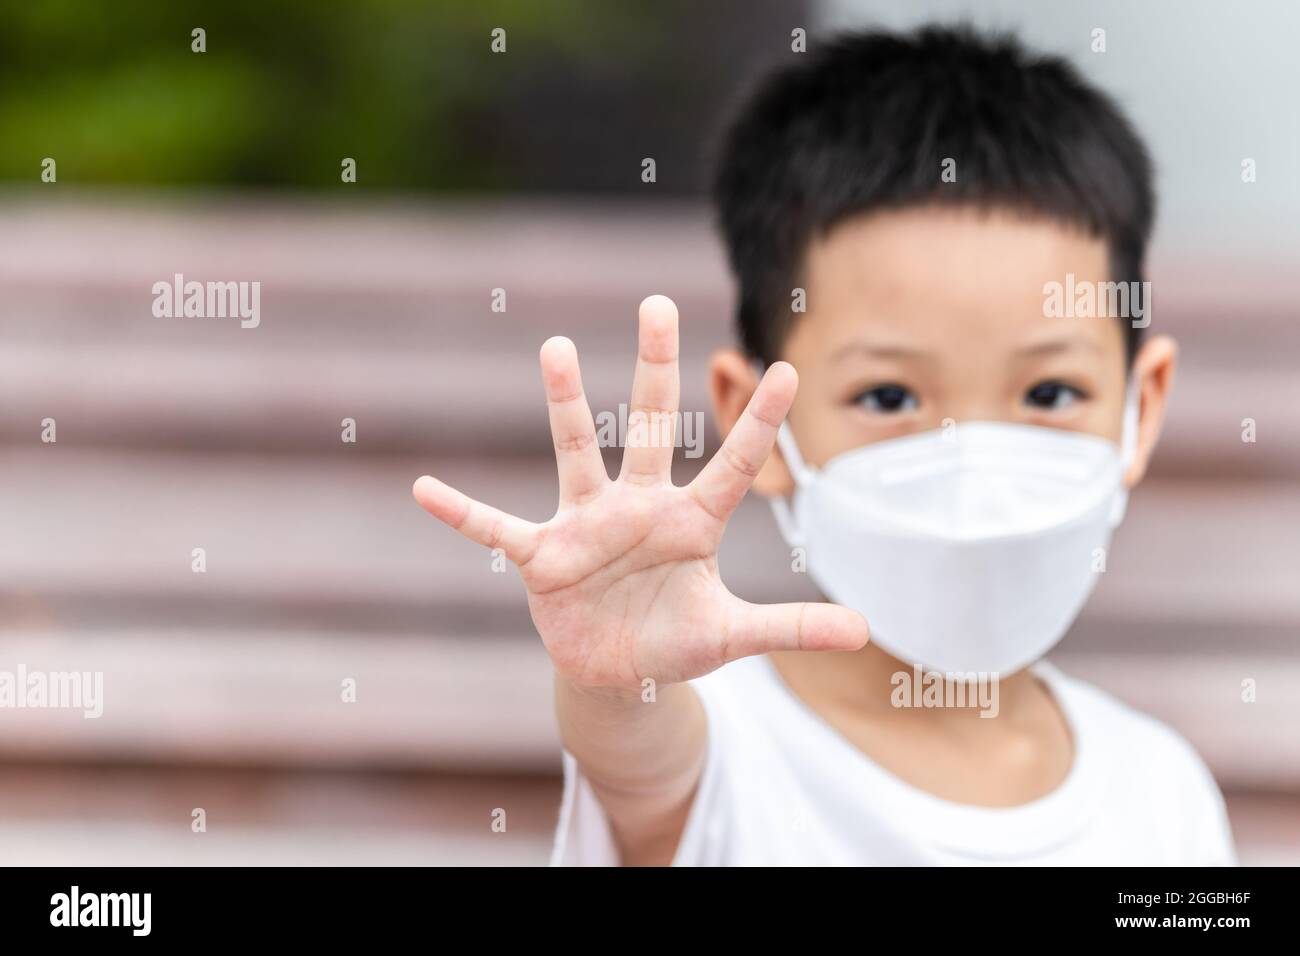 Asian little child showing stop his hand. A kid wearing face mask. Domestic Family violence concept. stop sign. focus hand. Stock Photo